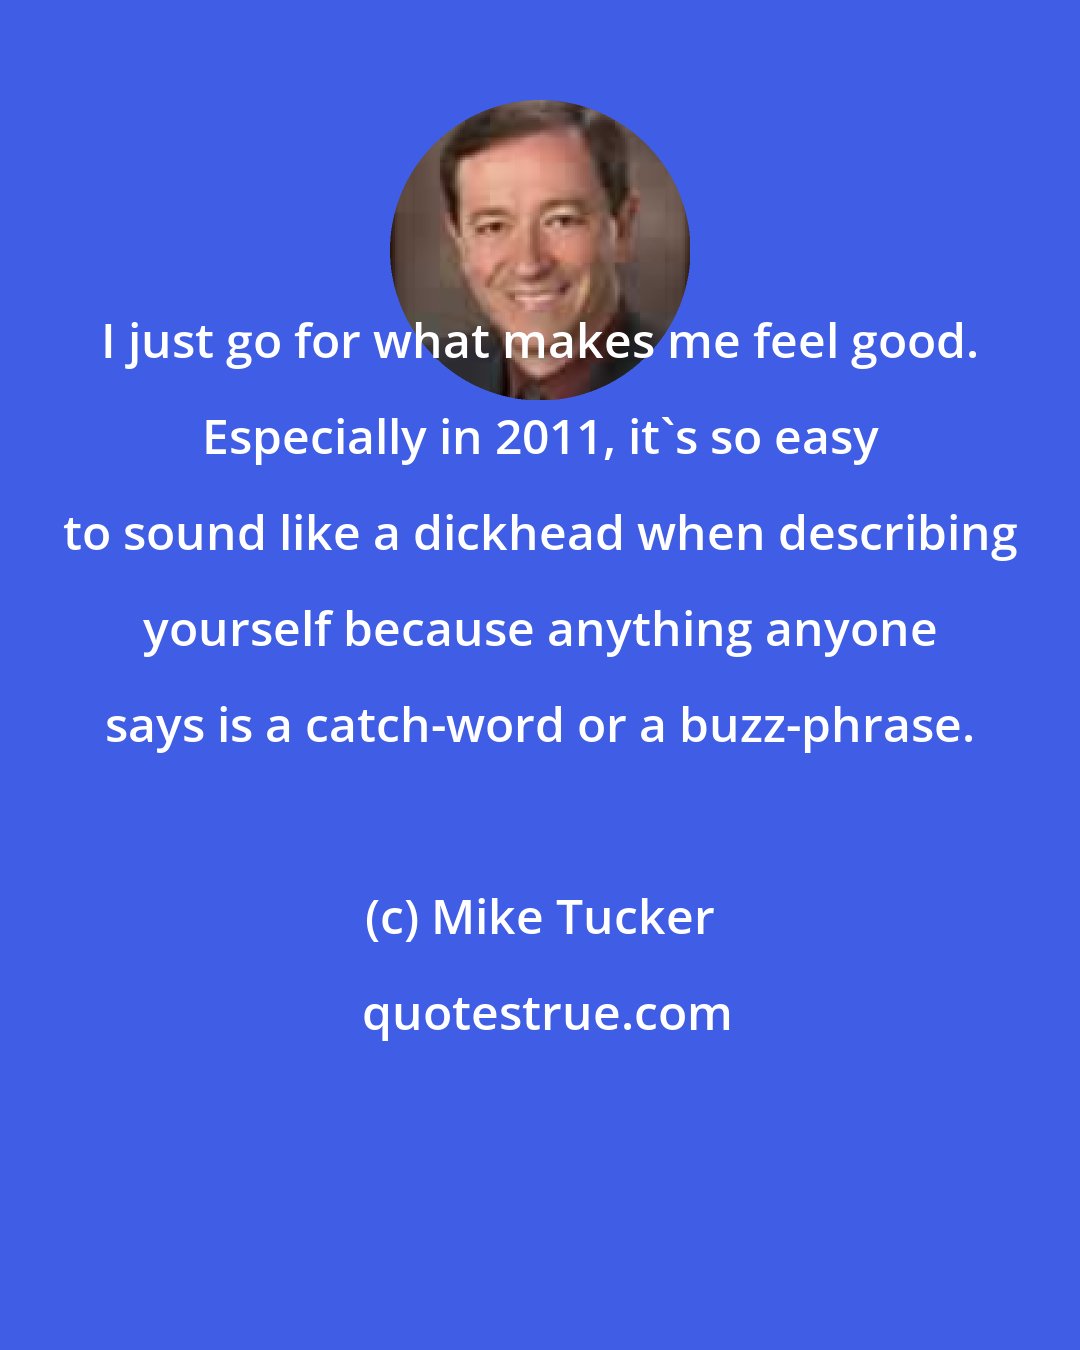 Mike Tucker: I just go for what makes me feel good. Especially in 2011, it's so easy to sound like a dickhead when describing yourself because anything anyone says is a catch-word or a buzz-phrase.